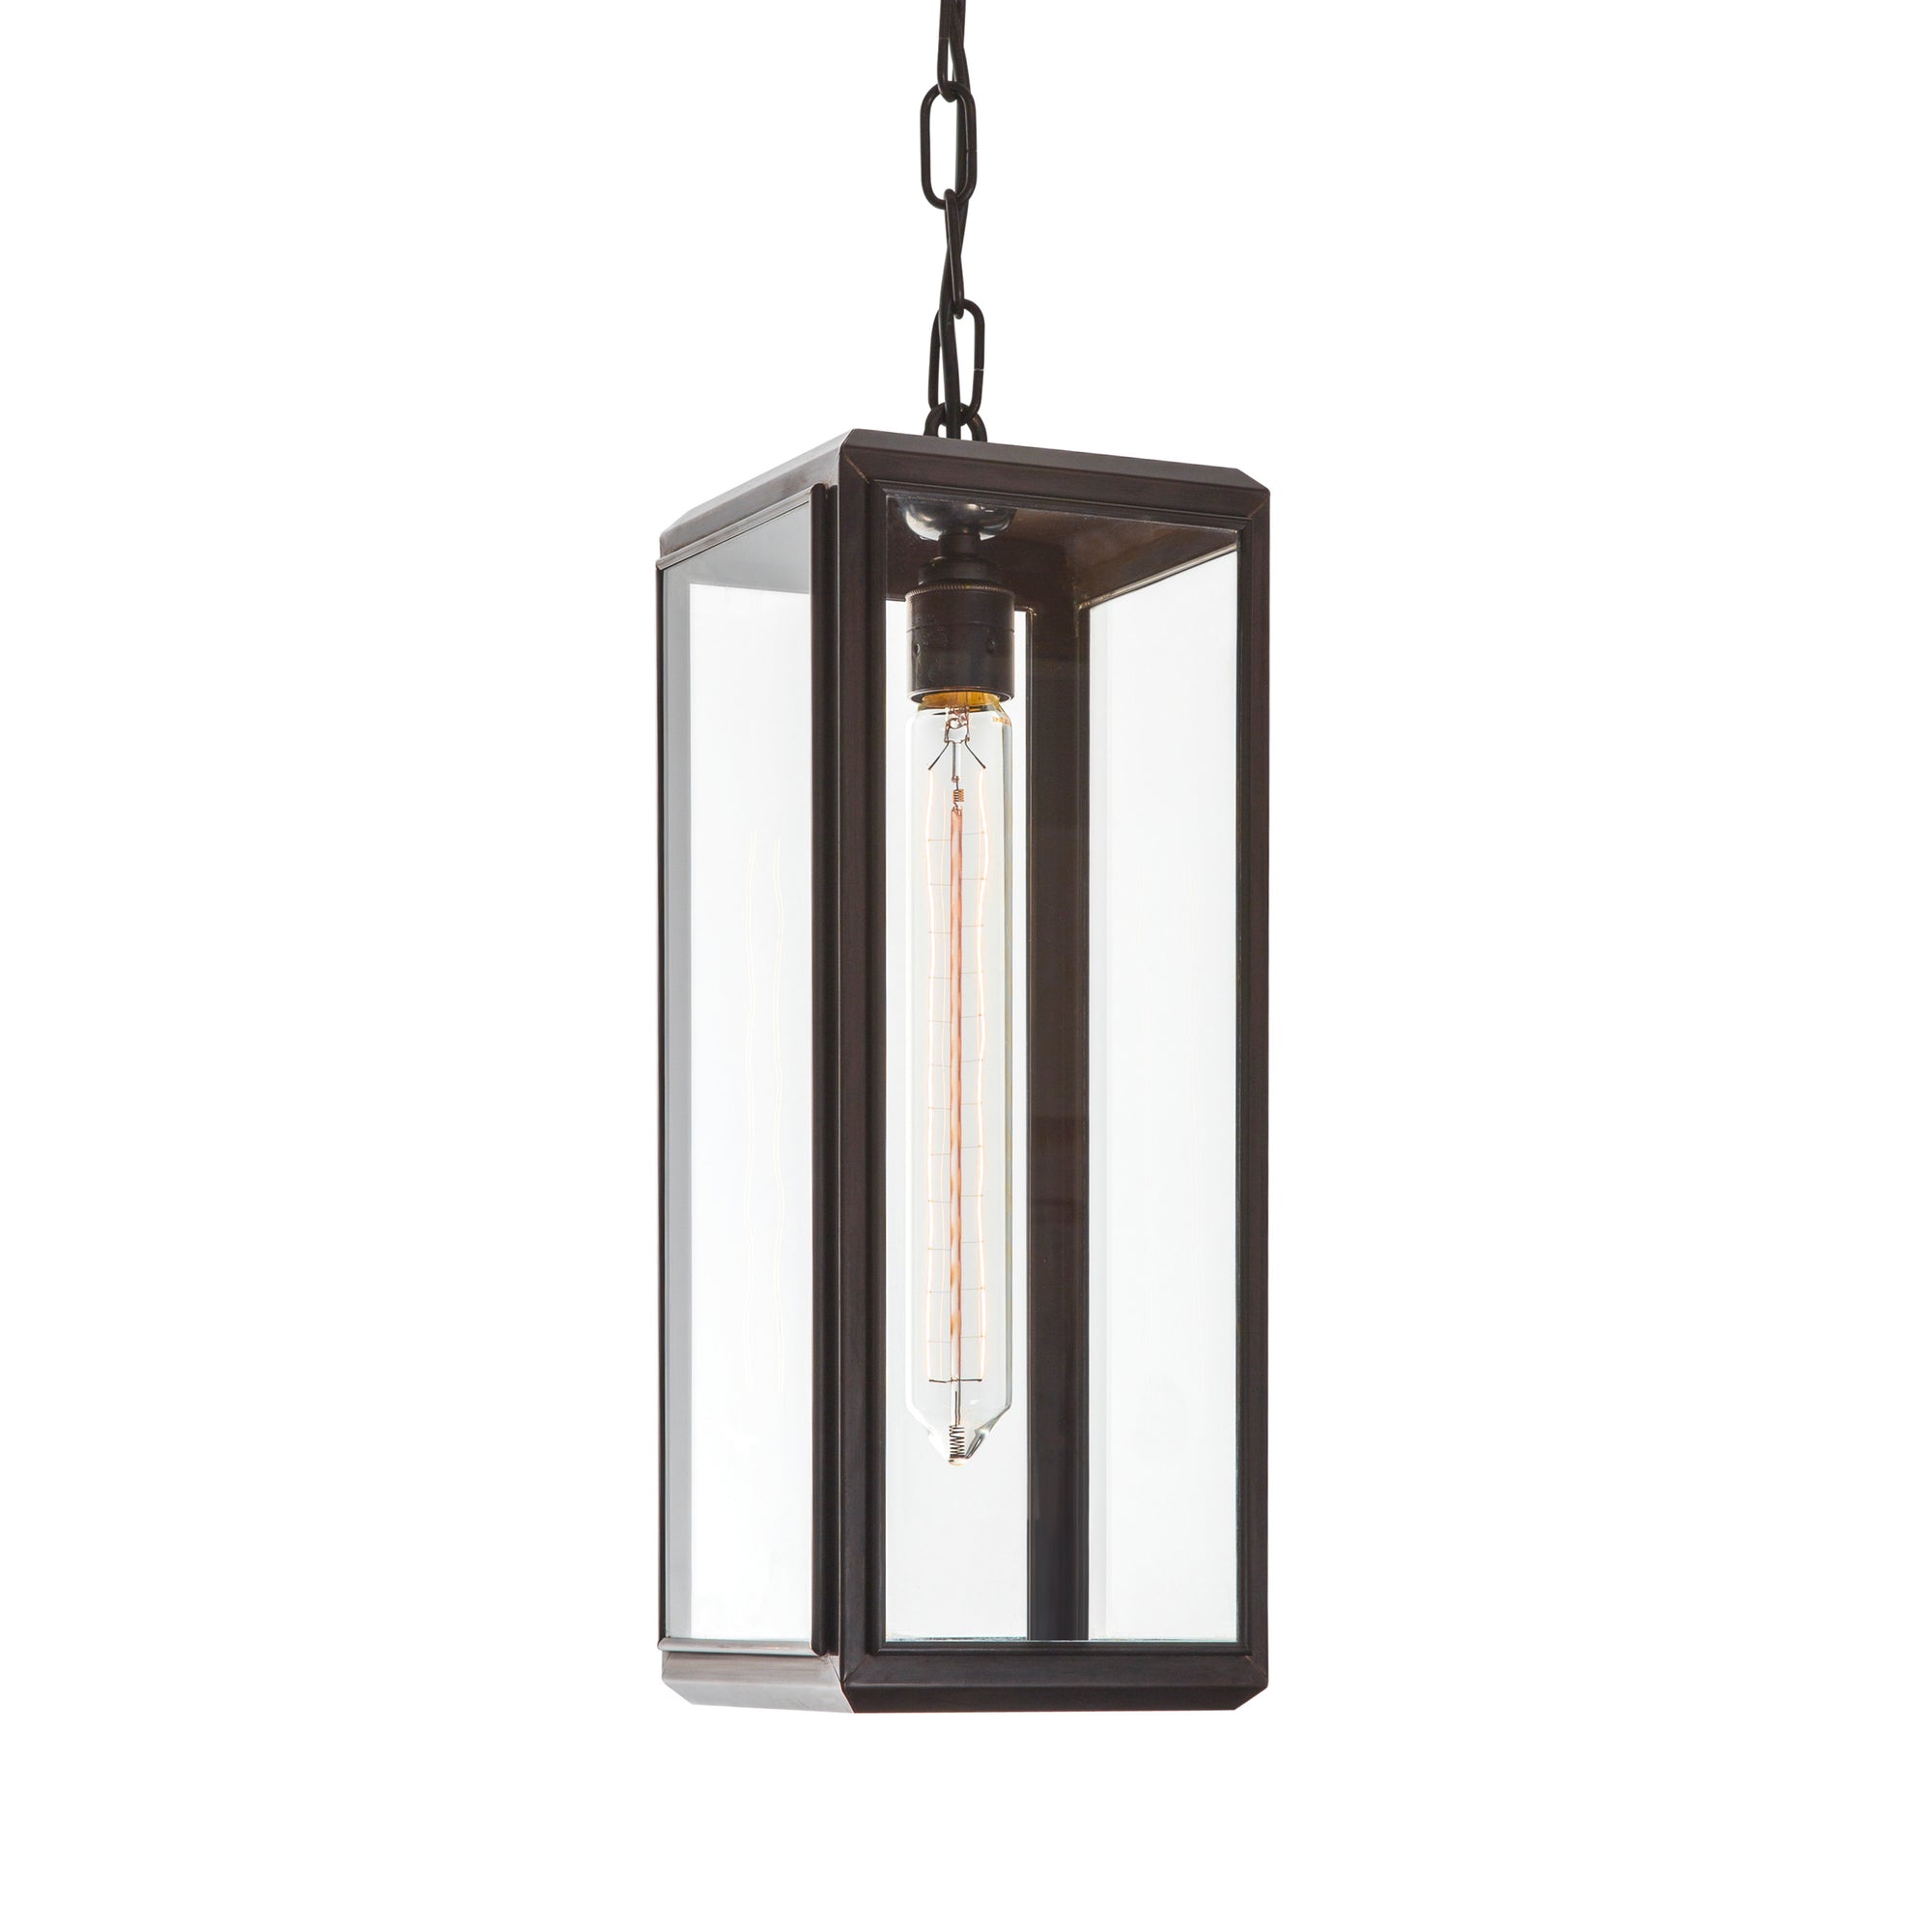 Lilac Tall Lantern Pendant Light in bronze with clear glass